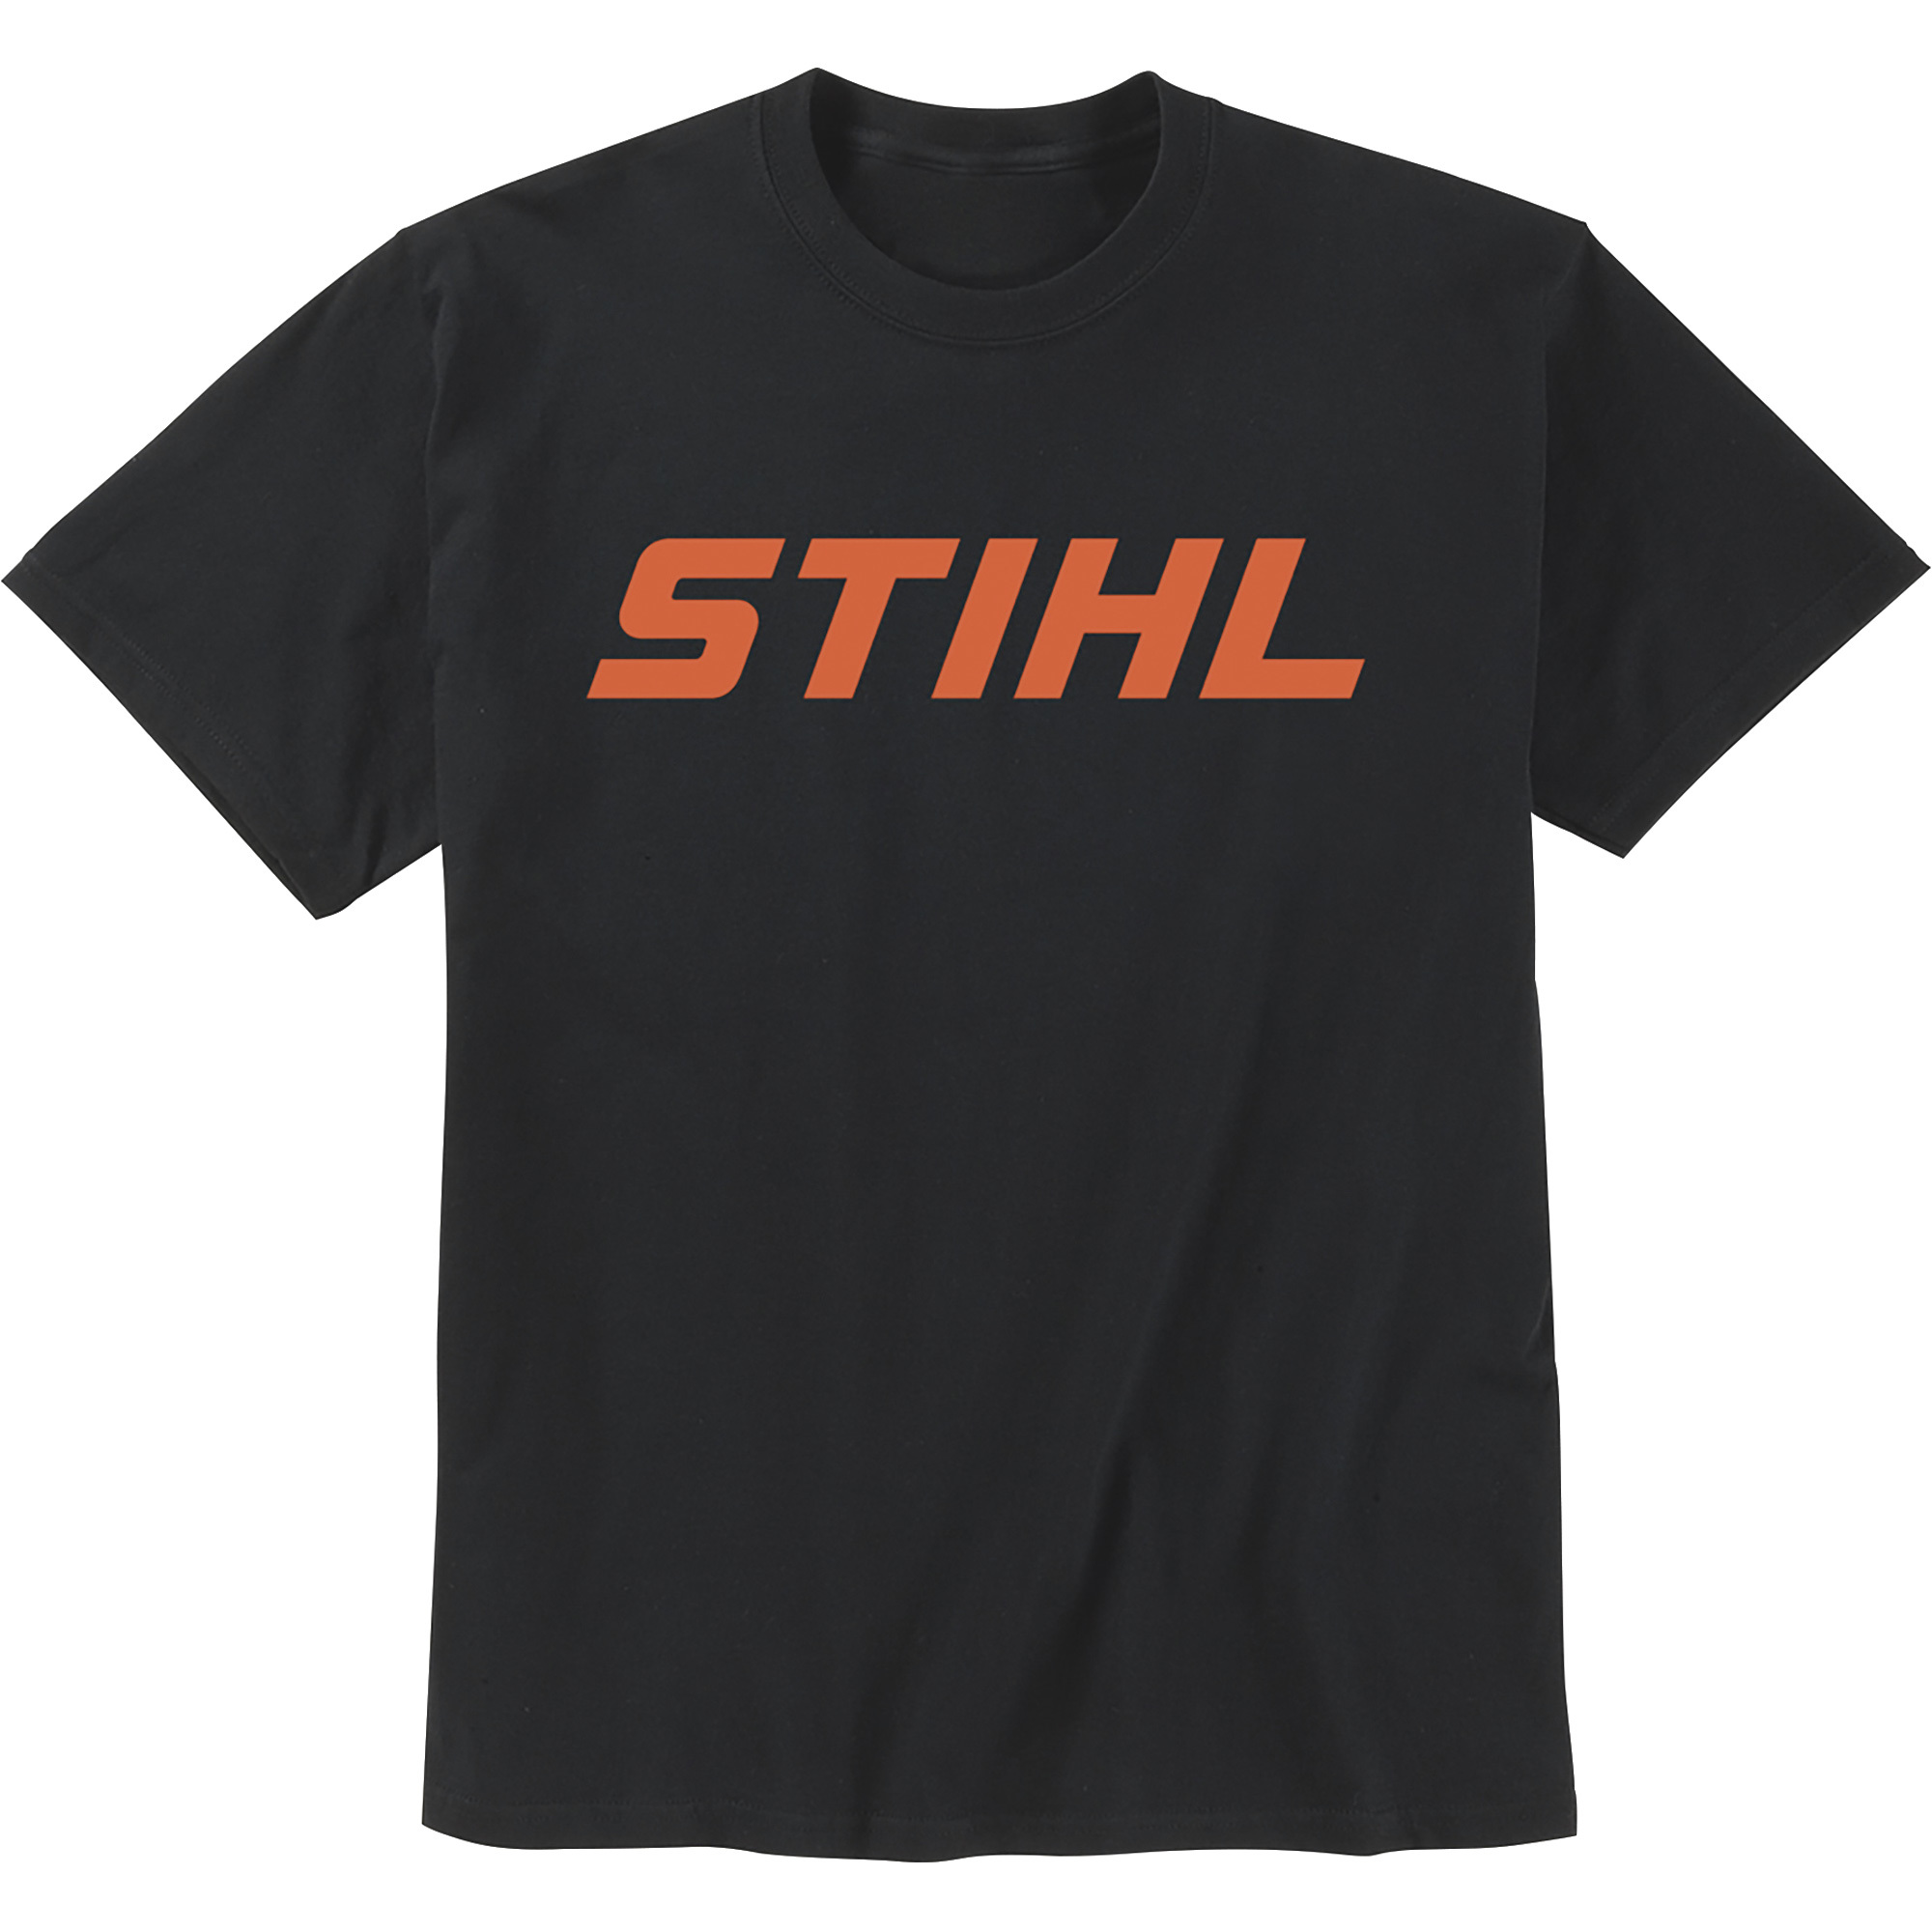 STIHL Outfitters Trademark T-Shirt â Black, Large